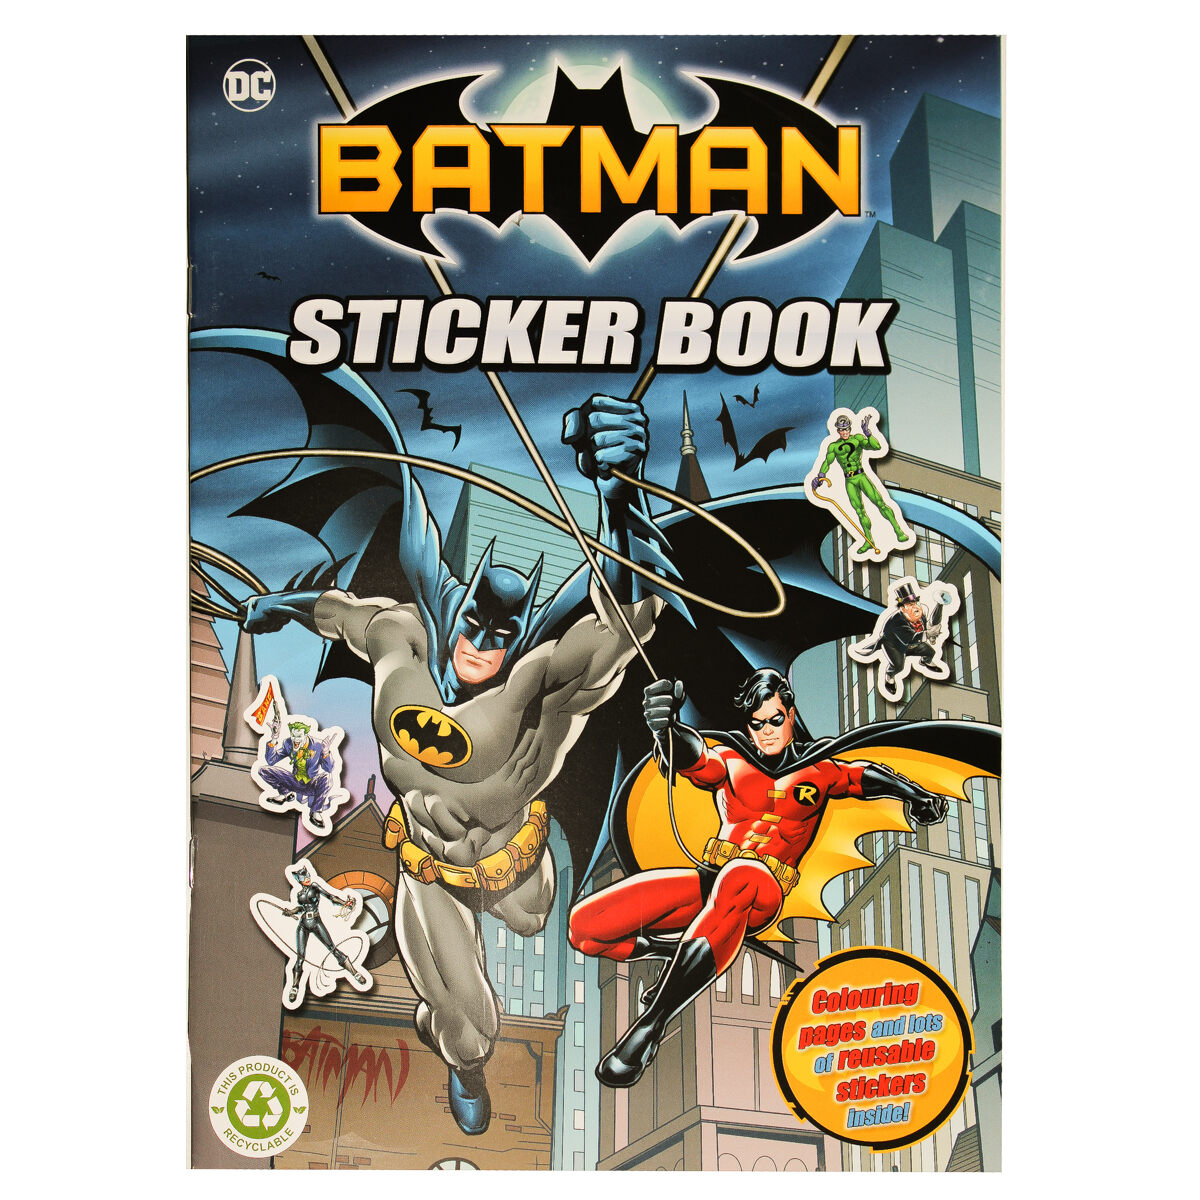 Batman Coloring Stickers Books Set with Reward Stickers, Coloring Pages,  Games, and Activities Bundle Includes Separately Licensed GWW Stickers